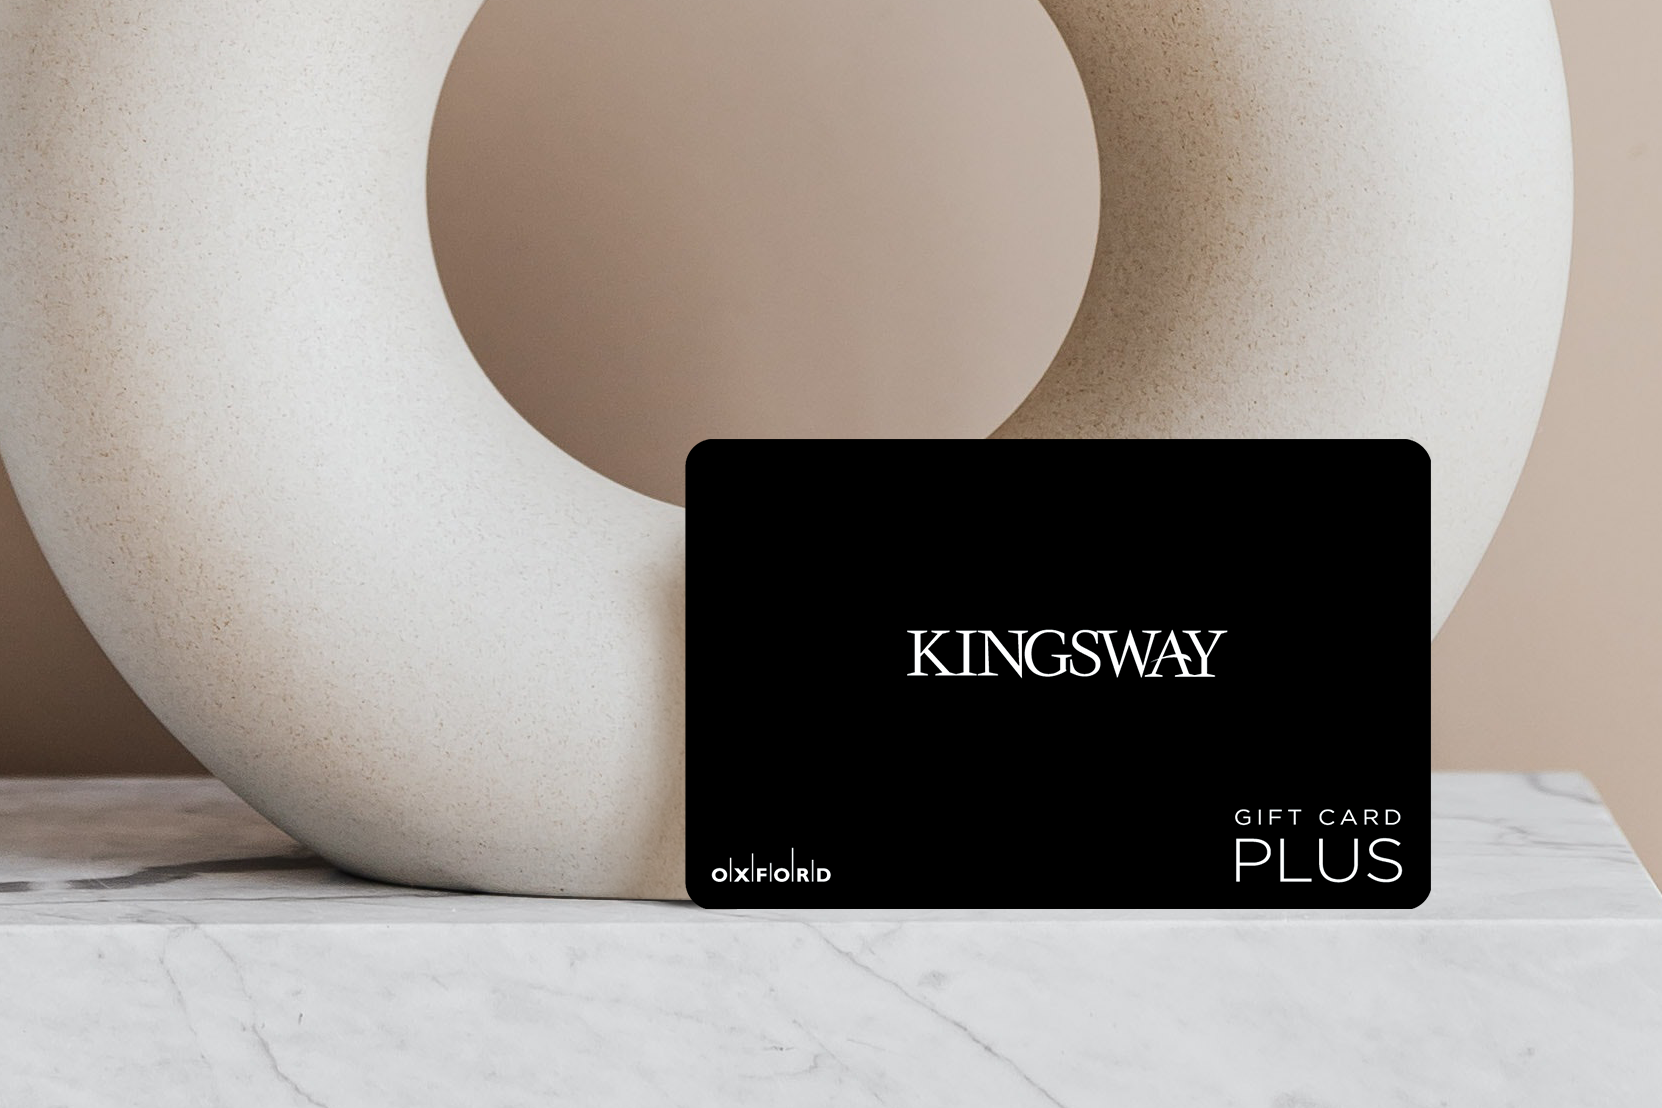 promotional image of a black kingsway gift card in front of a neutral circular vase